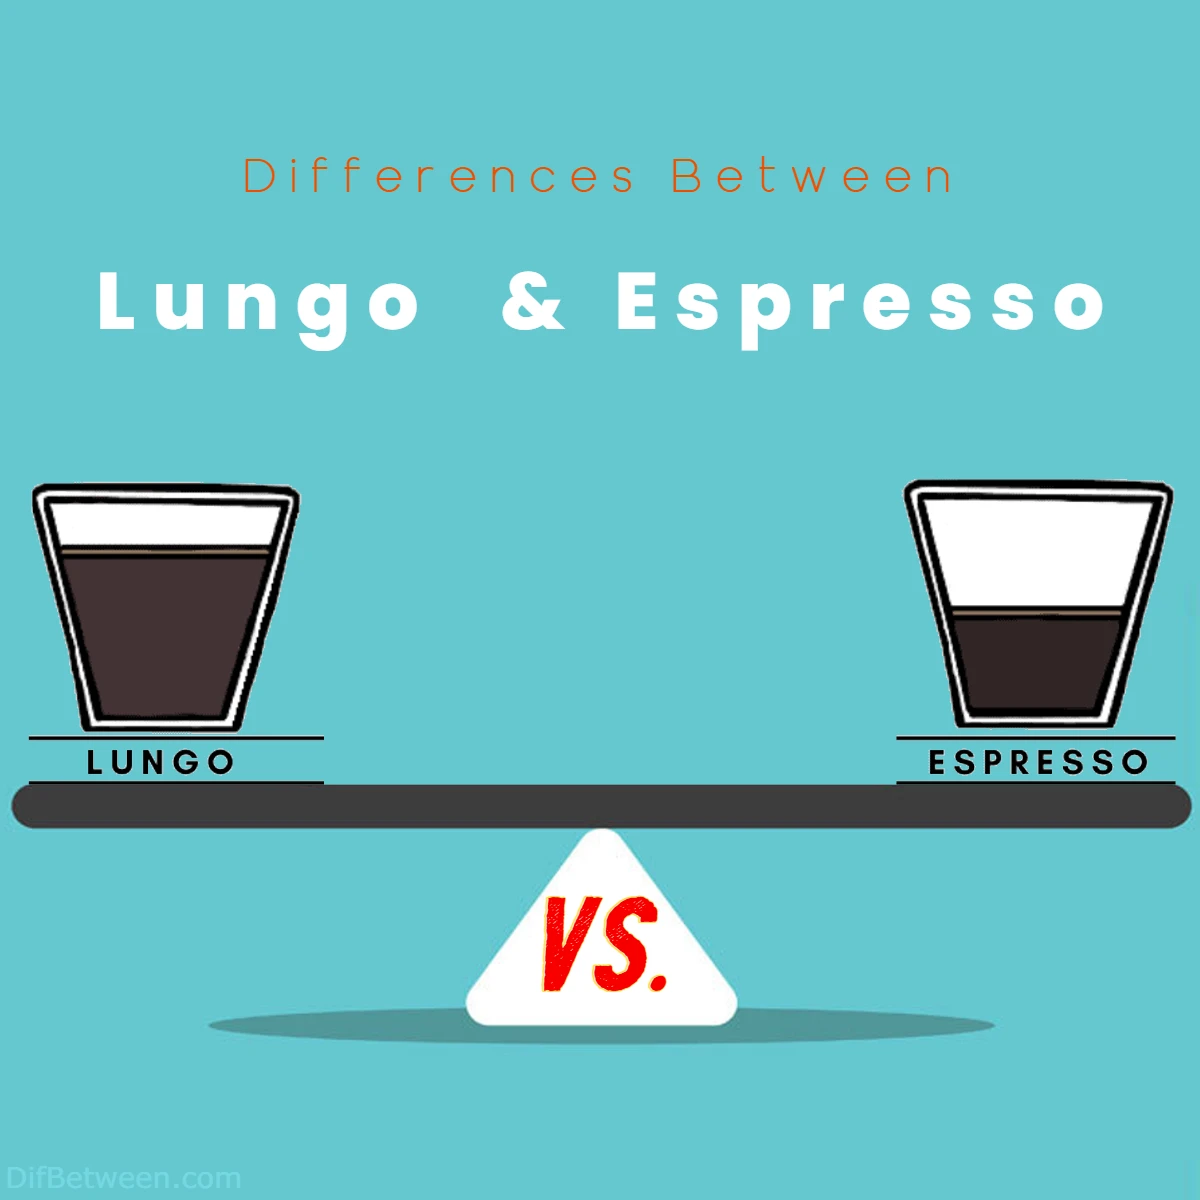 Differences Between Espresso and Lungo